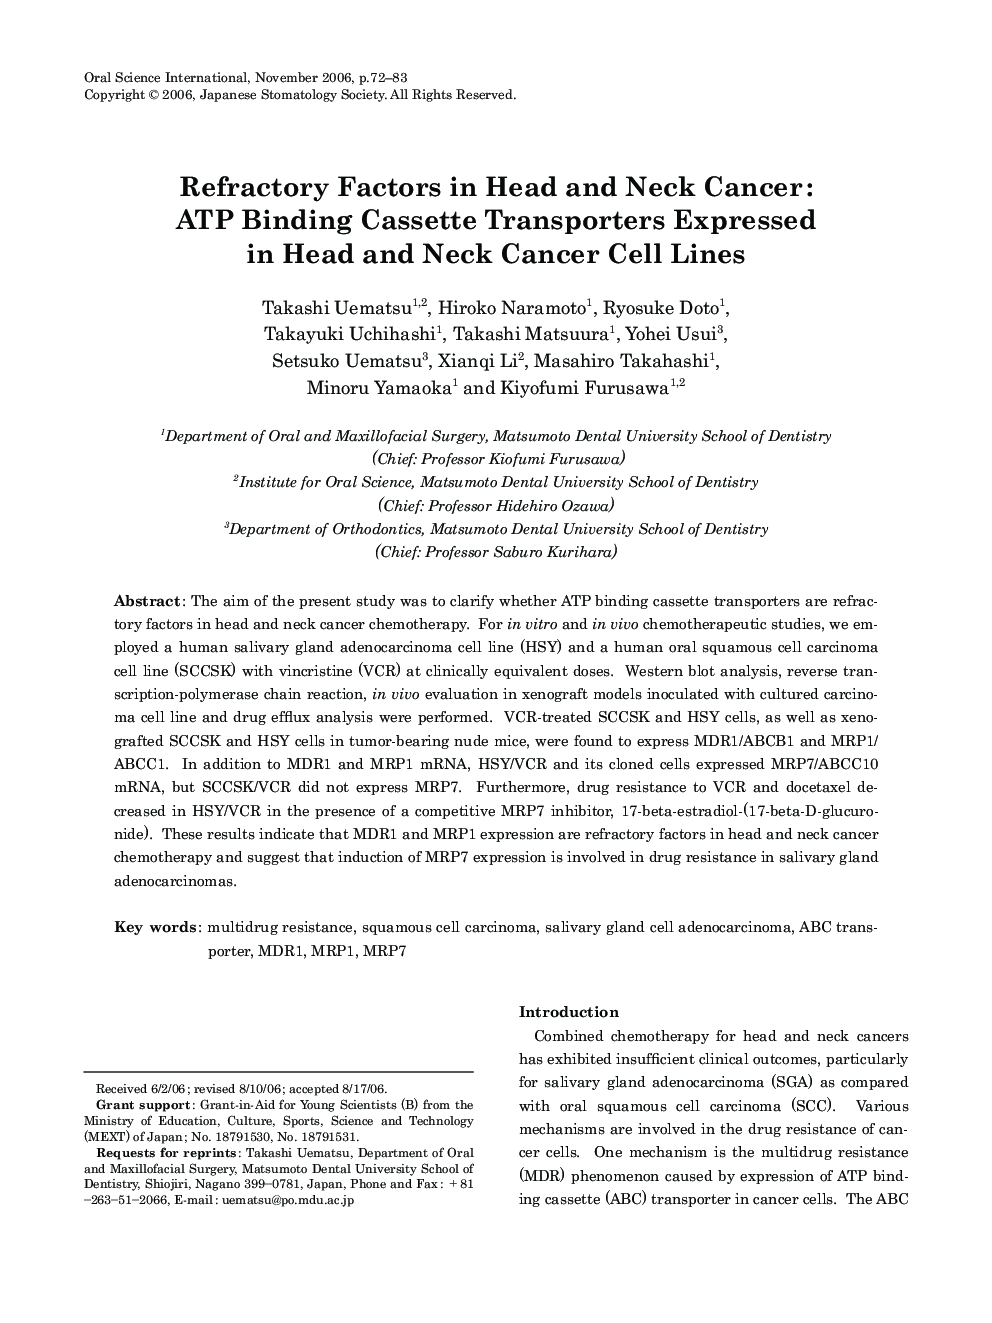 Refractory Factors in Head and Neck Cancer: ATP Binding Cassette Transporters Expressed in Head and Neck Cancer Cell Lines 